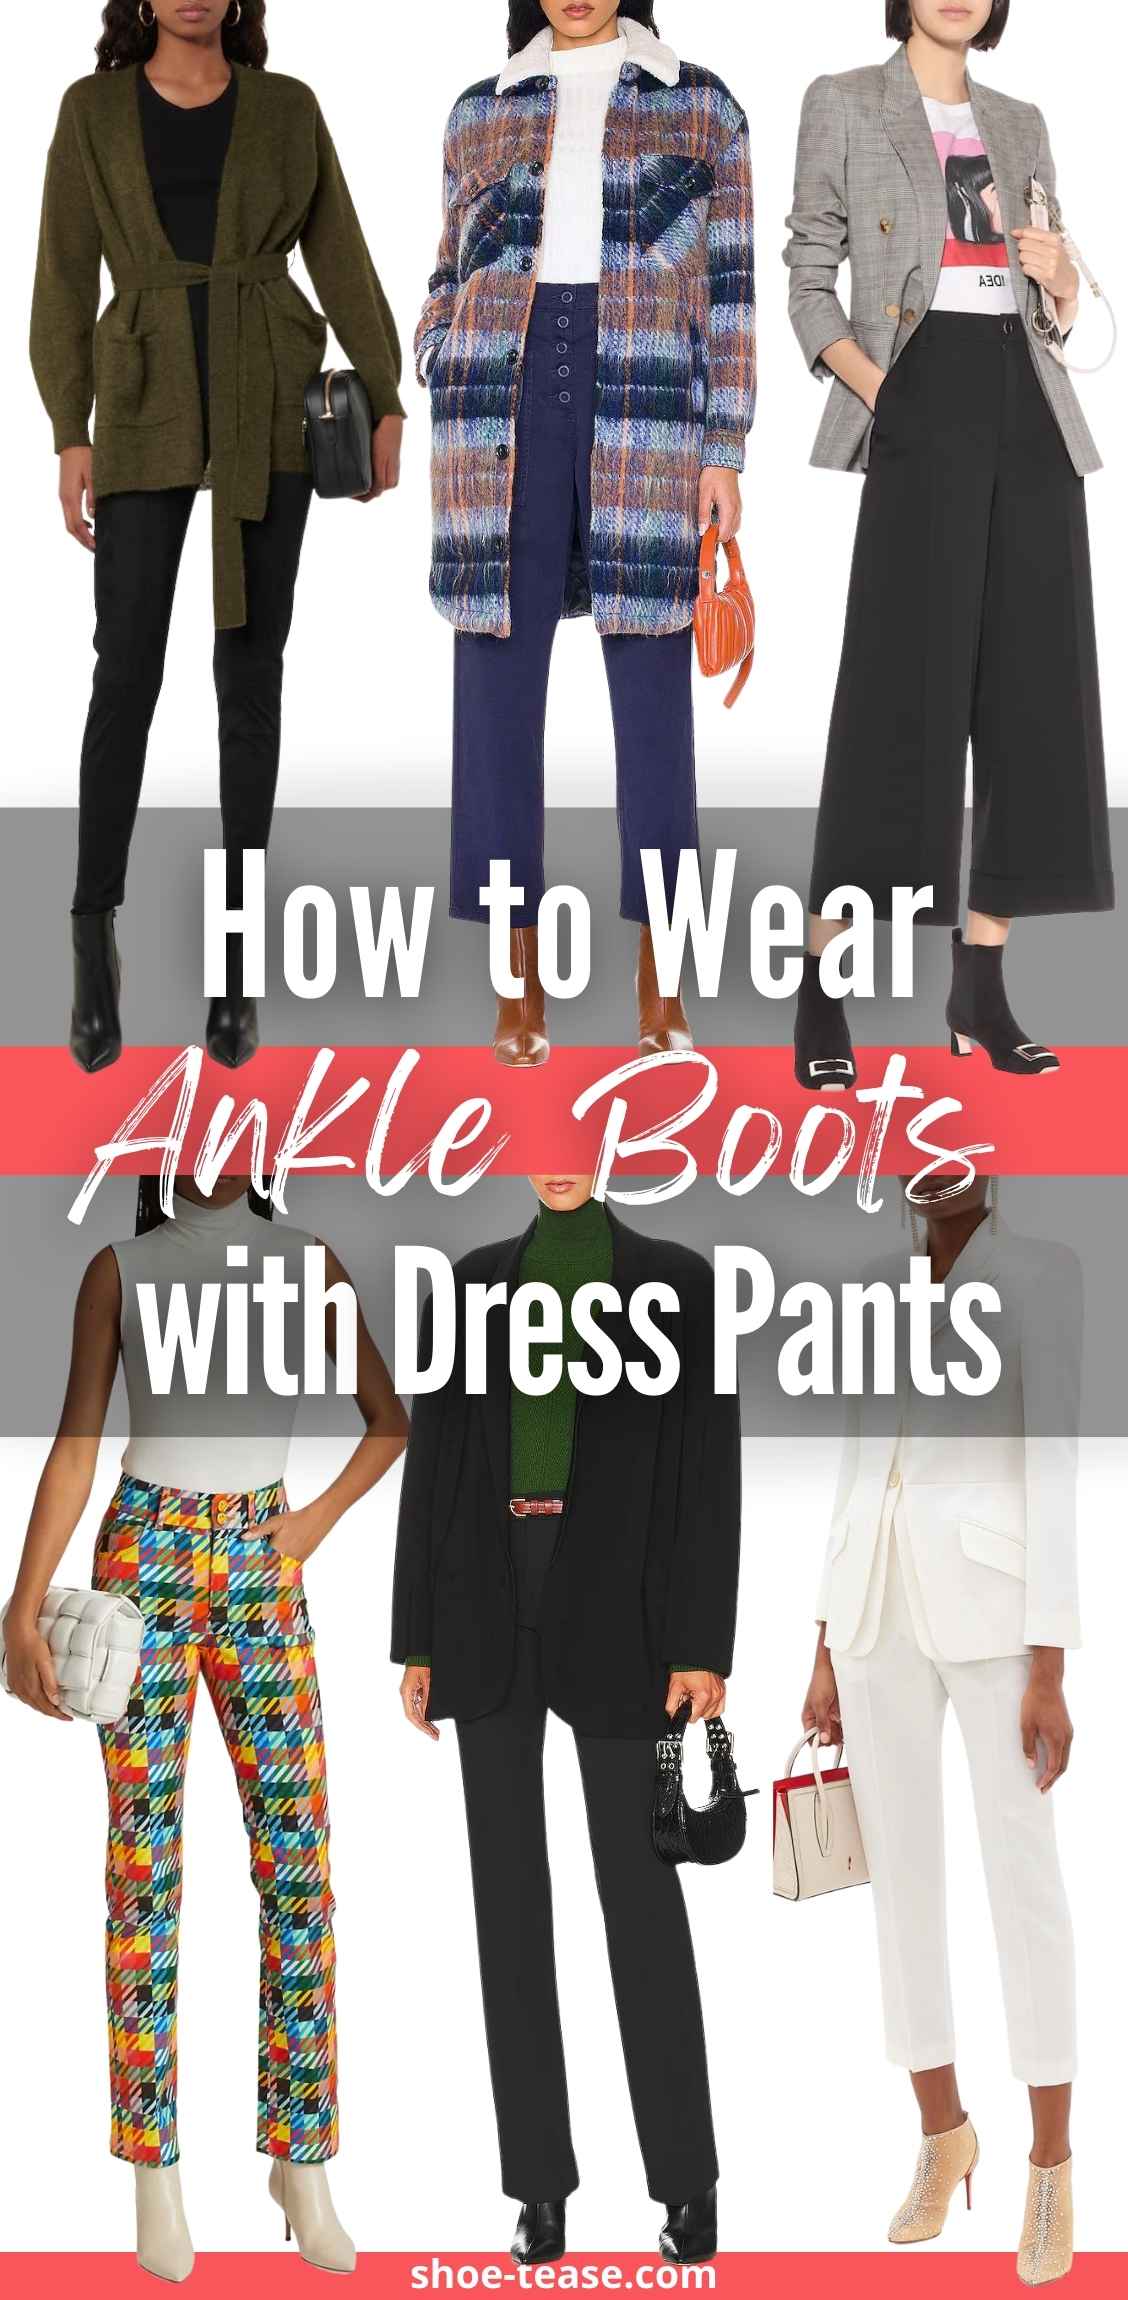 How To Wear Ankle Boots With Dress Pants A Woman S Guide